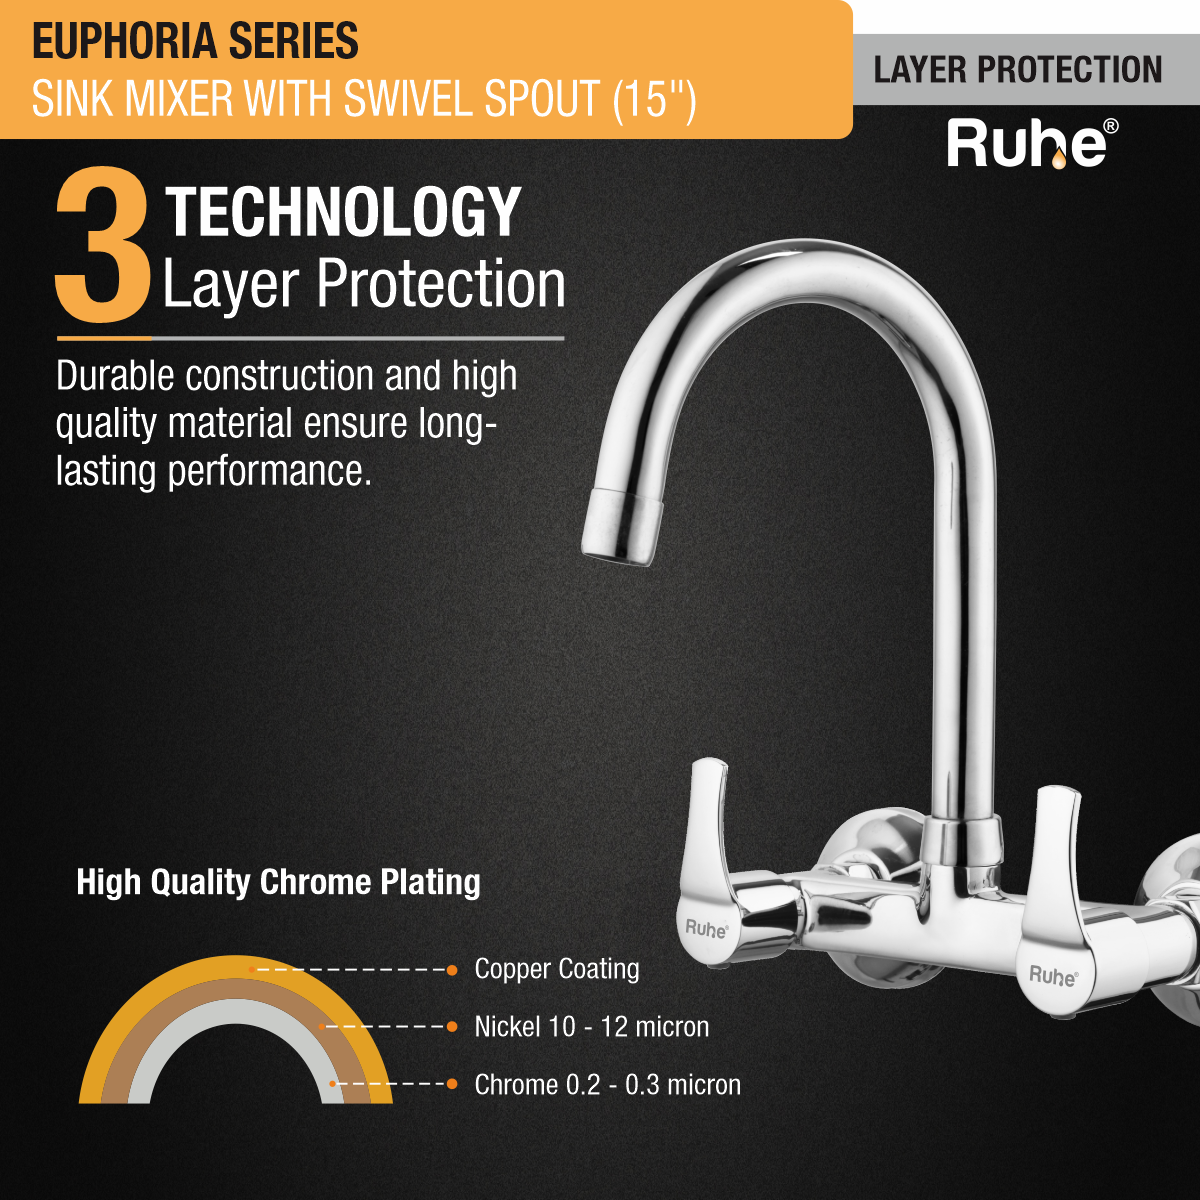 Euphoria Sink Mixer with Medium (15 inches) Round Swivel Spout Faucet 3 layer protection